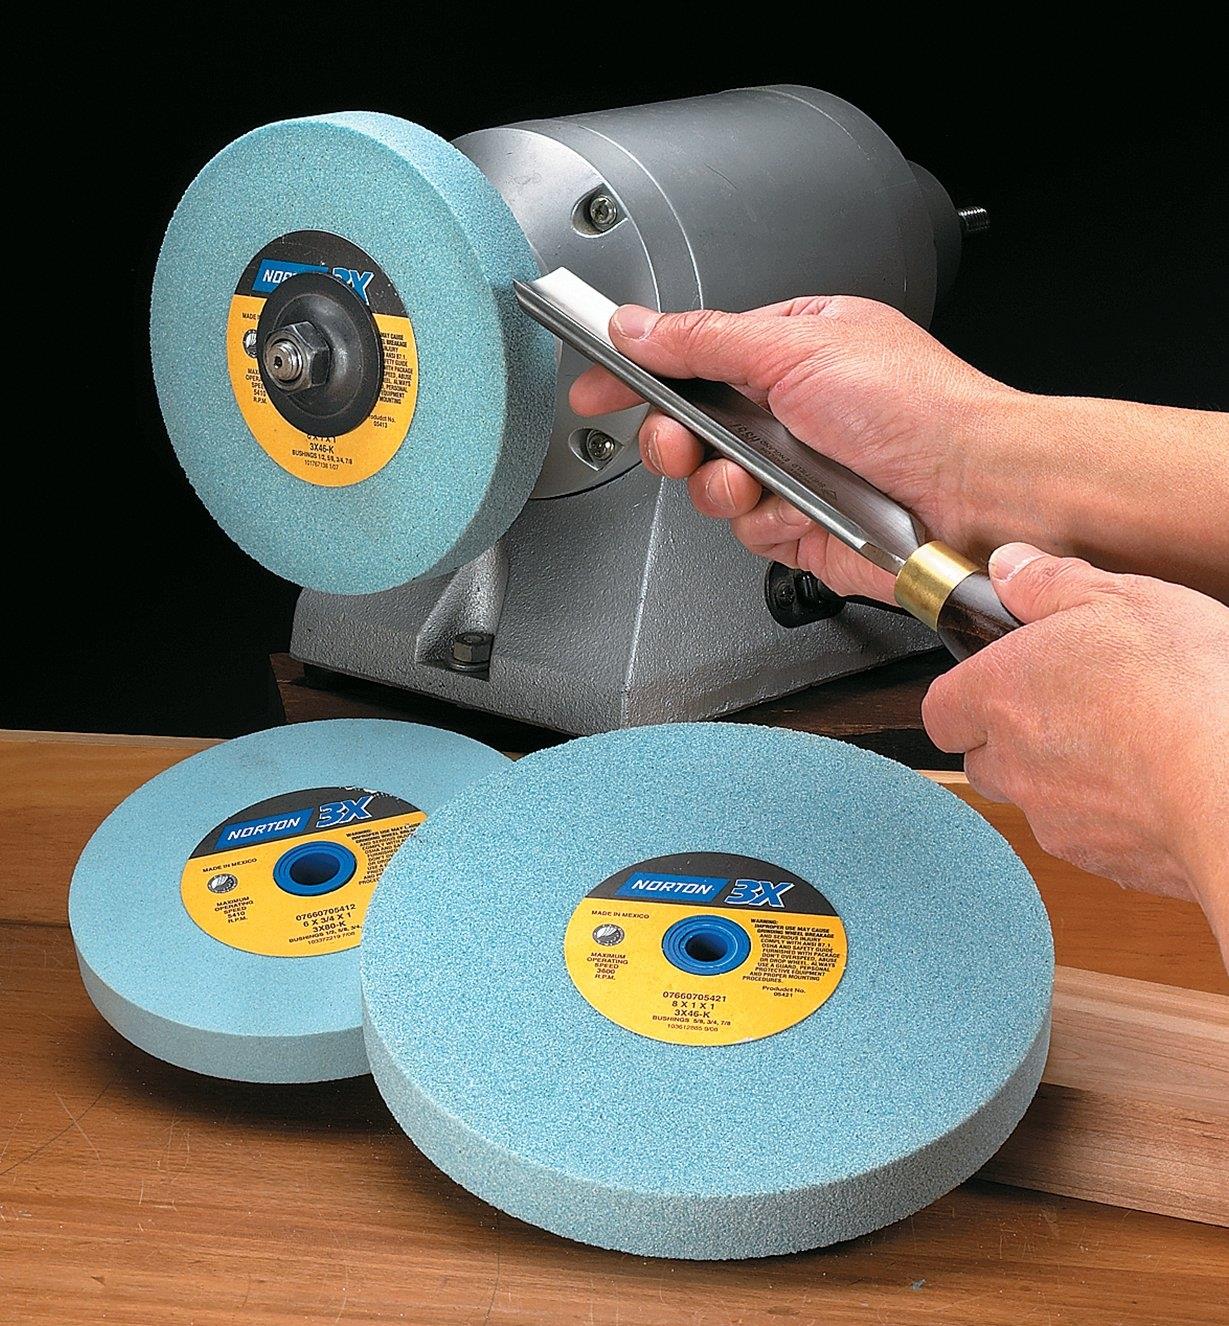 Grinding a gouge using a Norton 3X grinding wheel